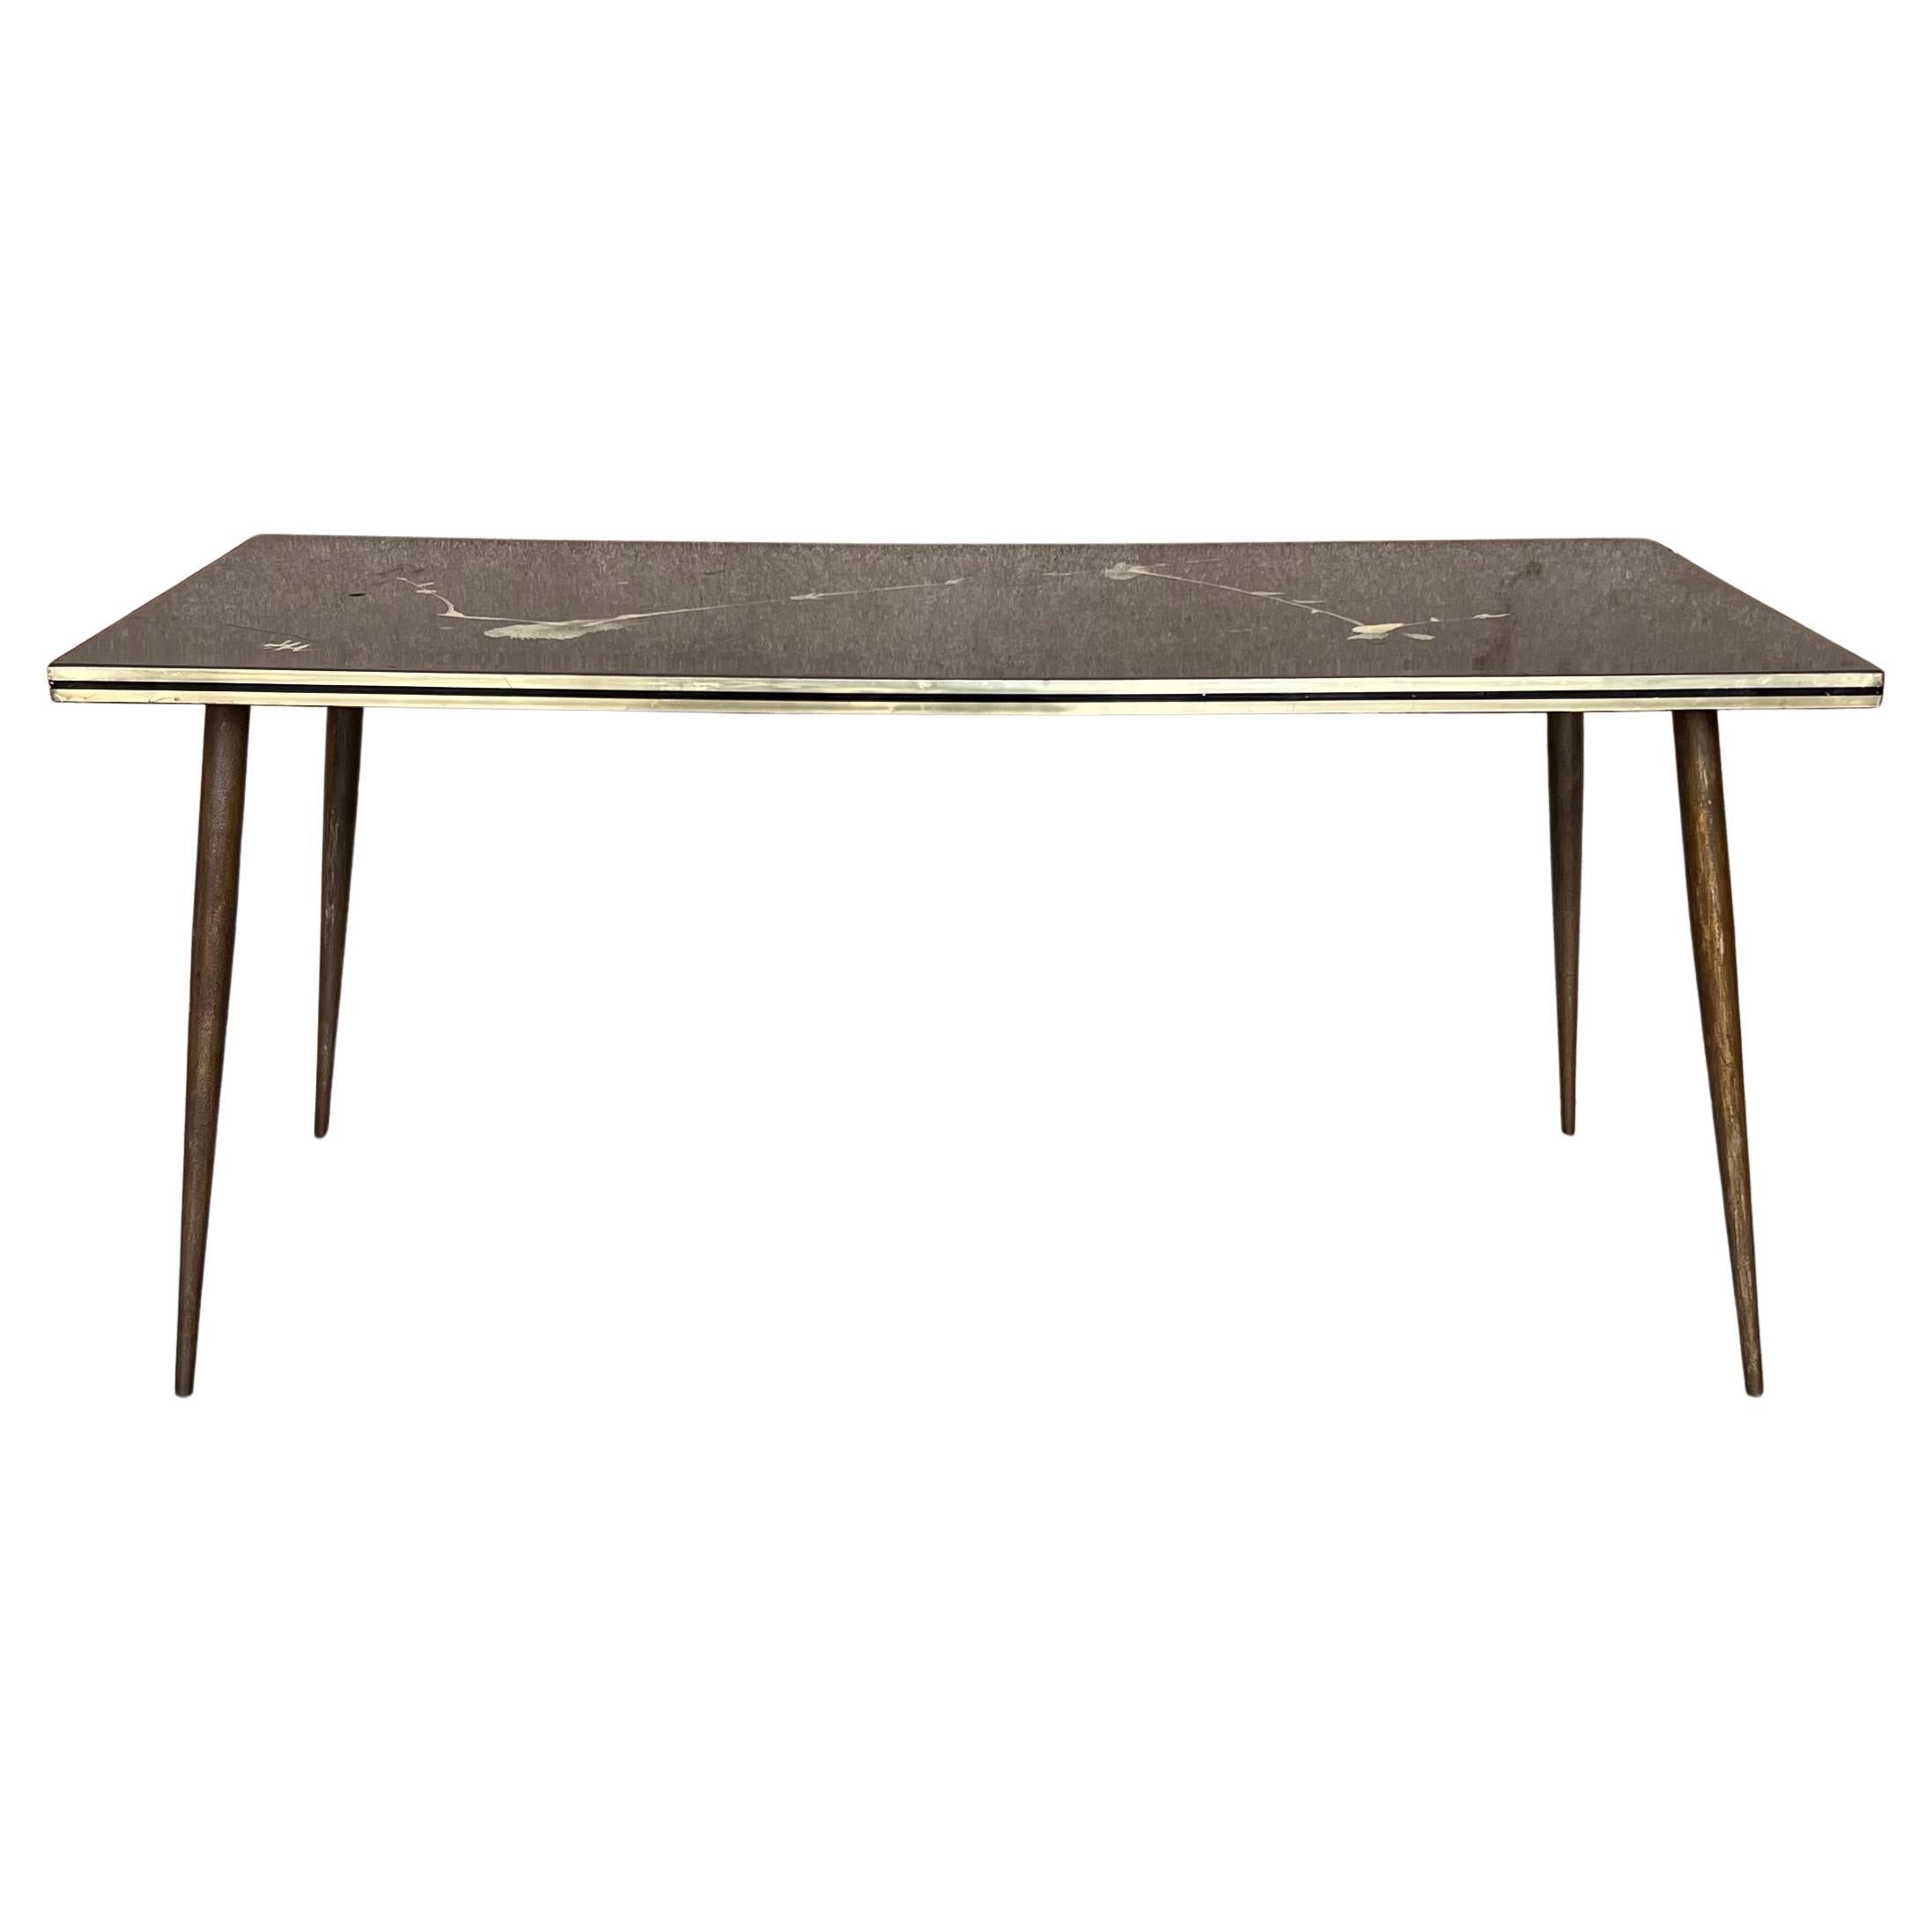 Italian Mid-Century Modern Black & Gold Coffee Table with Abstract Painting Top For Sale